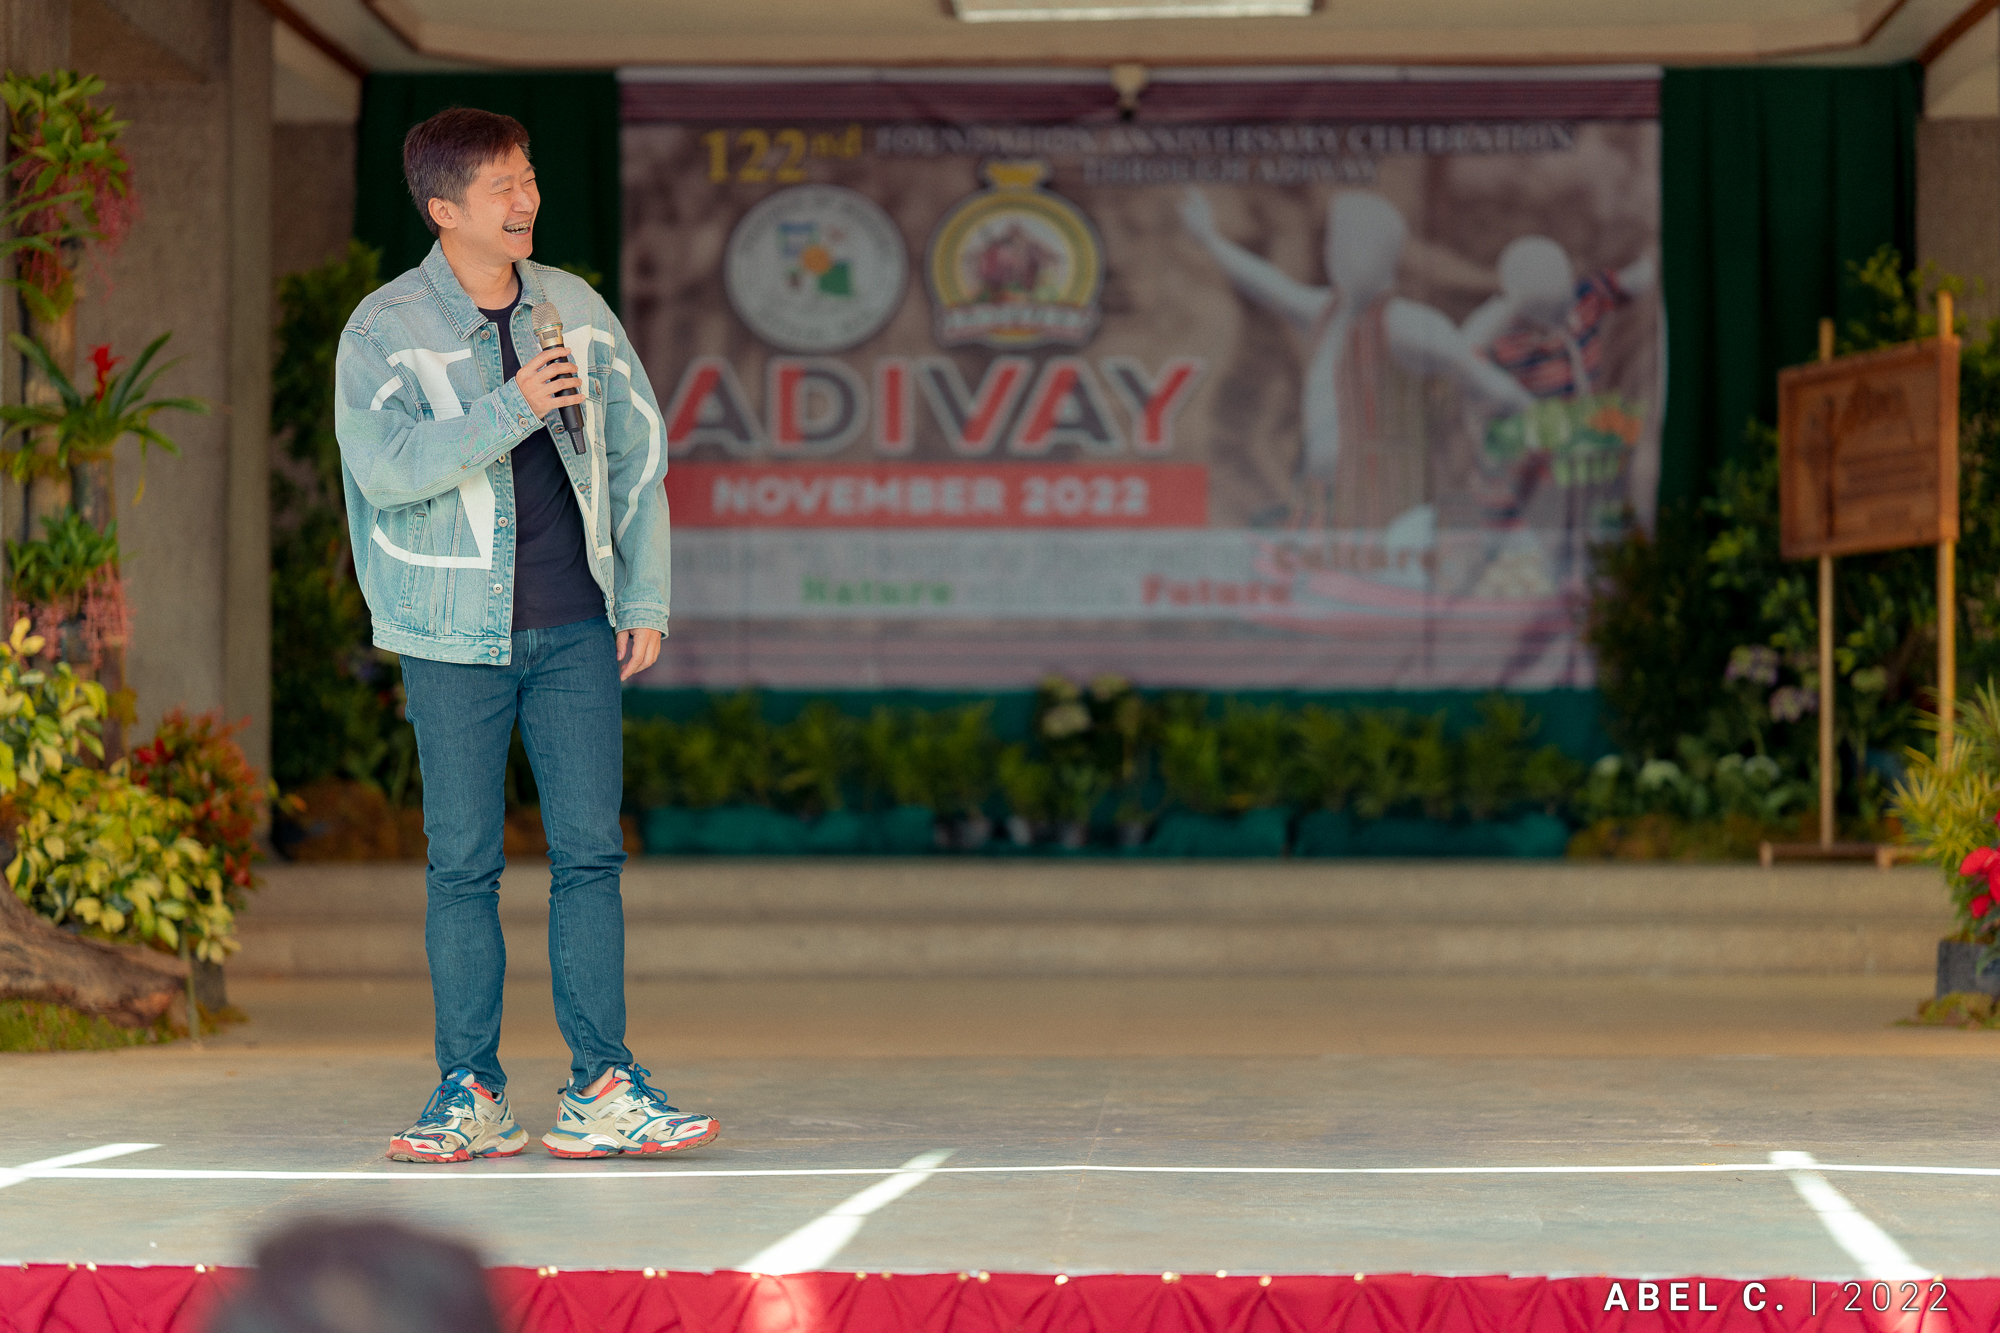 BENGUET ADIVAY HAS OFFICIALLY STARTED2